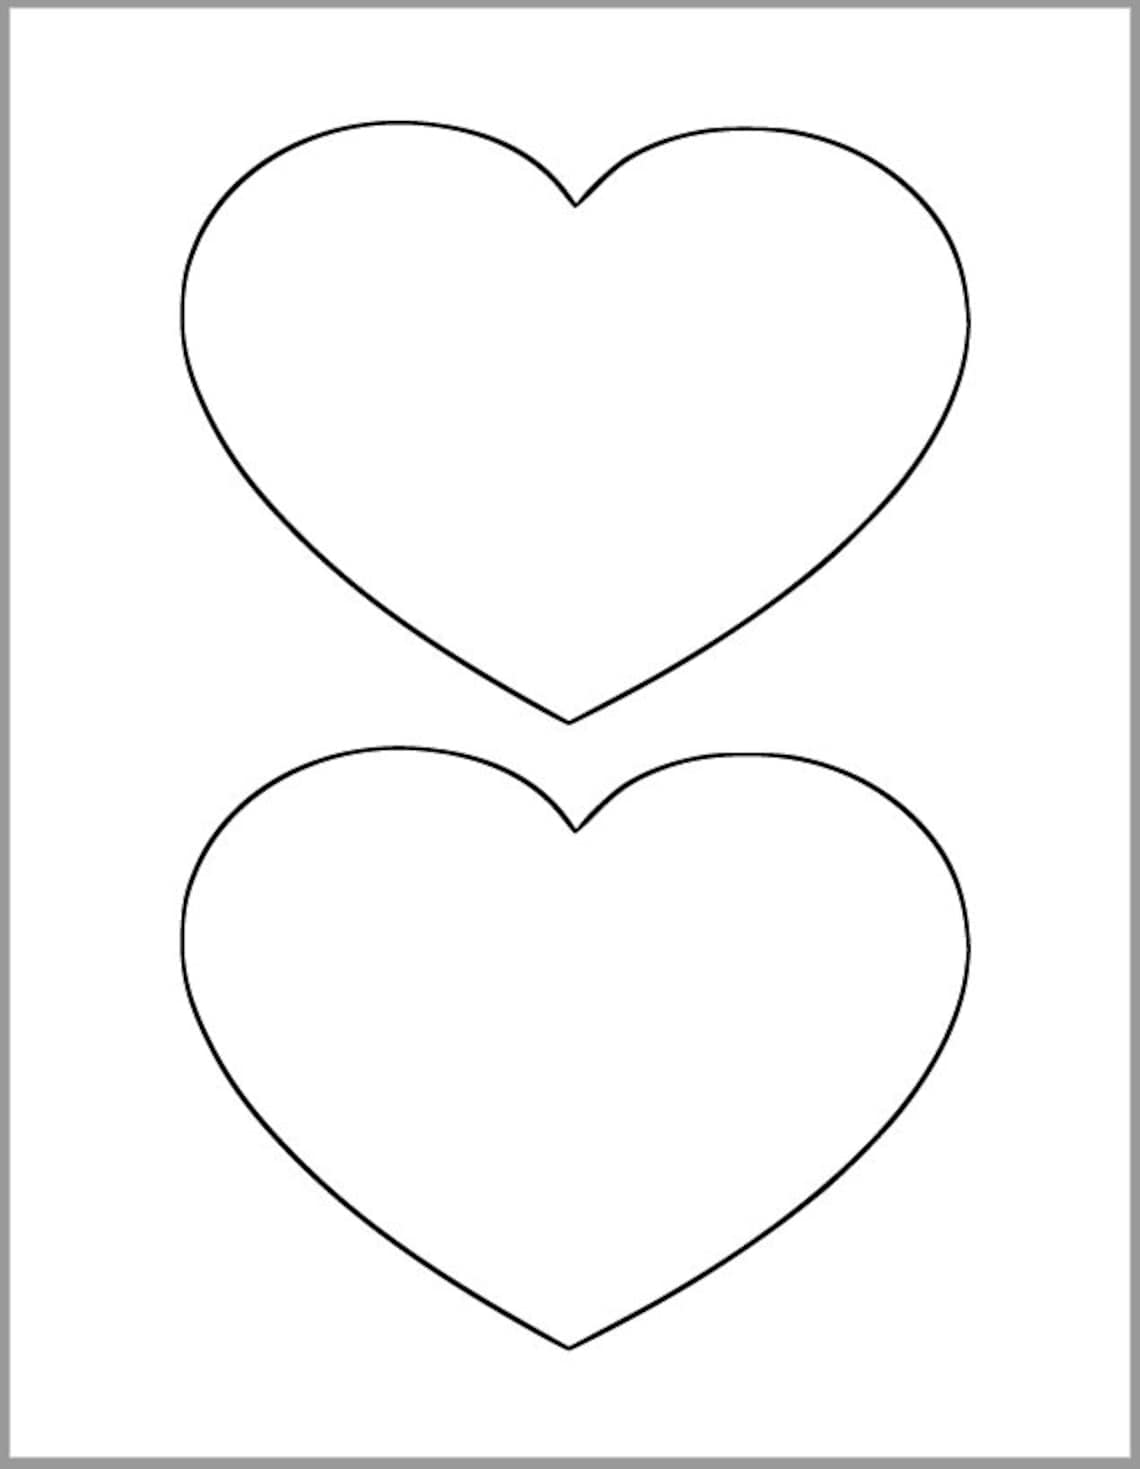 6 inch heart printable template large heart cutout valentines etsy